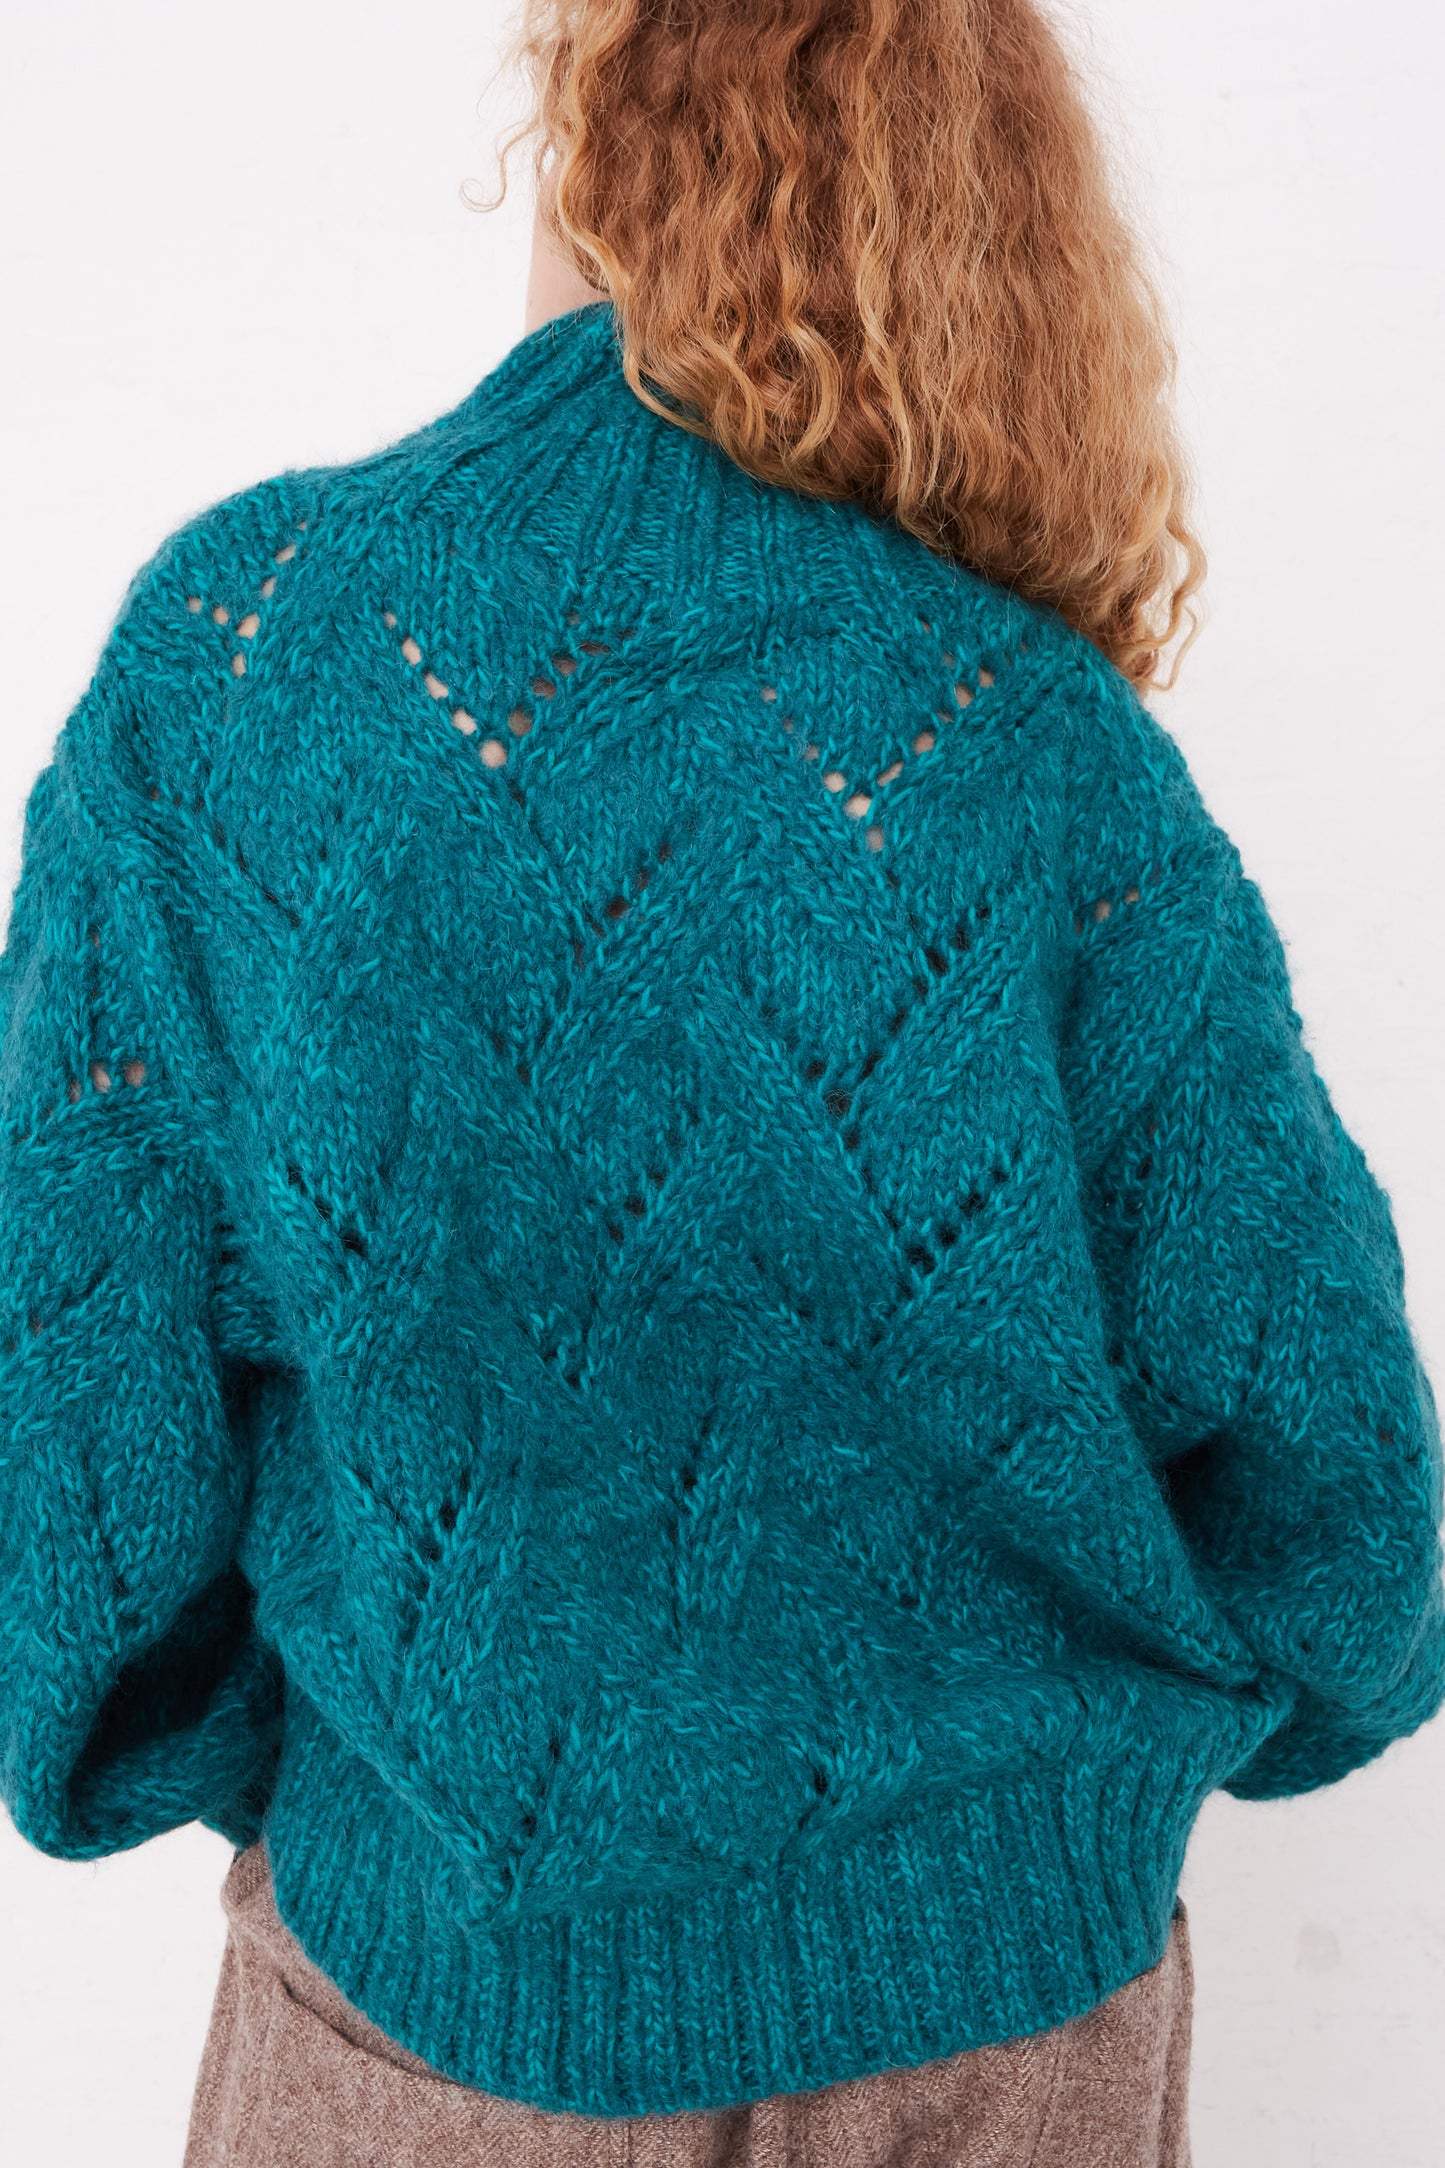 The back view of a woman wearing an oversized Ichi Antiquités Hand-Knit Turtleneck in Green Teal sweater.